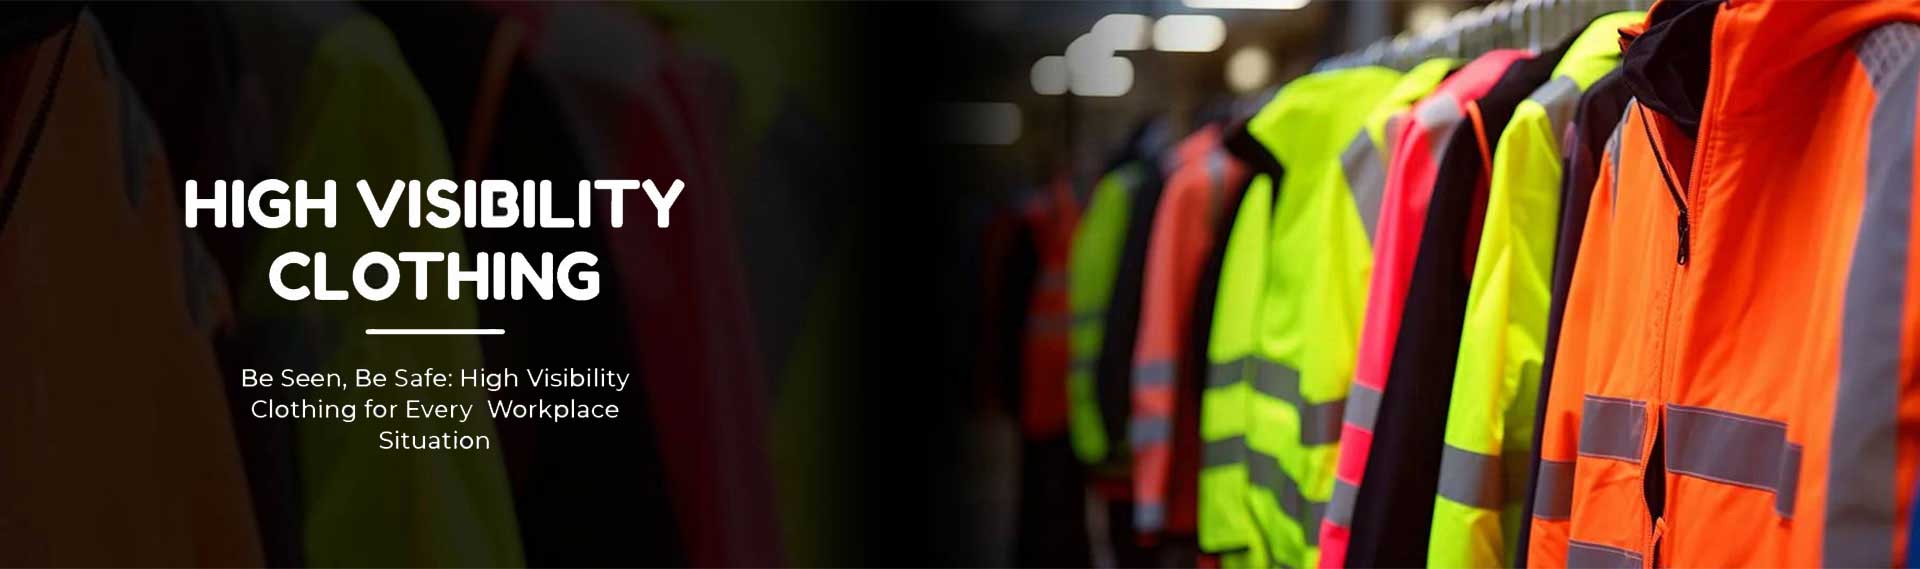 High Visibility Clothing in India